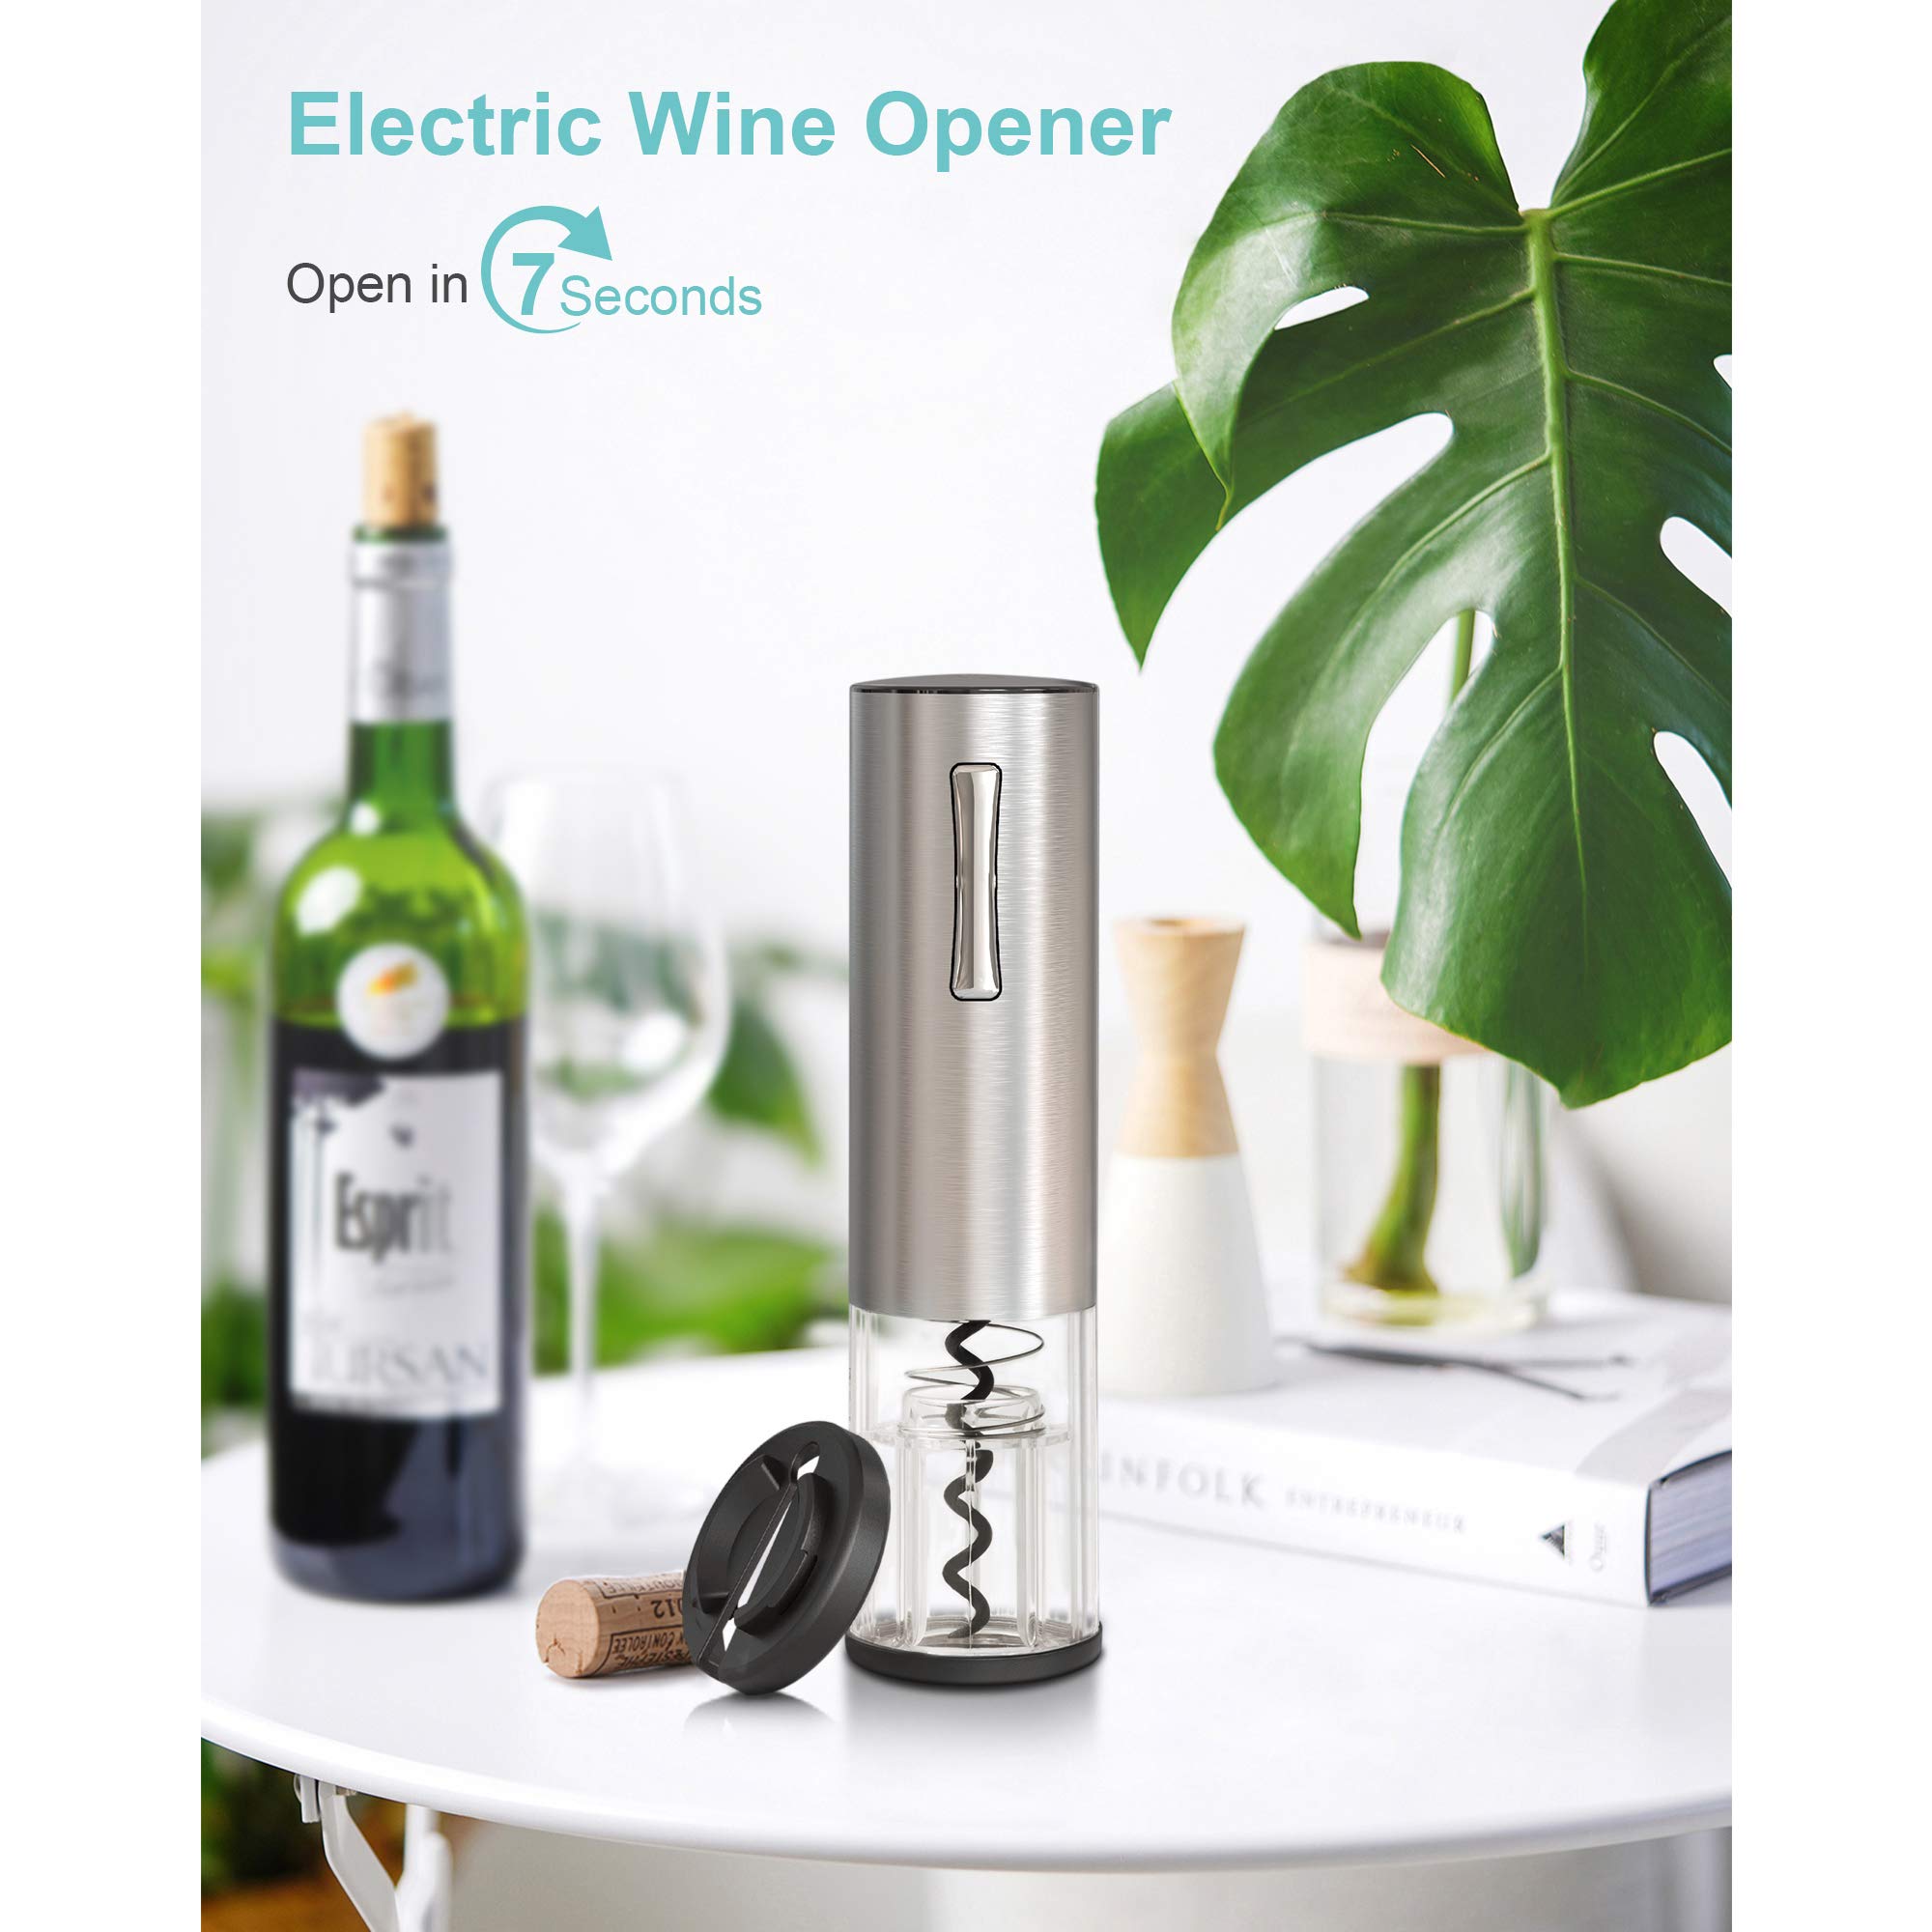 Stainless Steel Electric Wine Bottle Opener with foil cutter